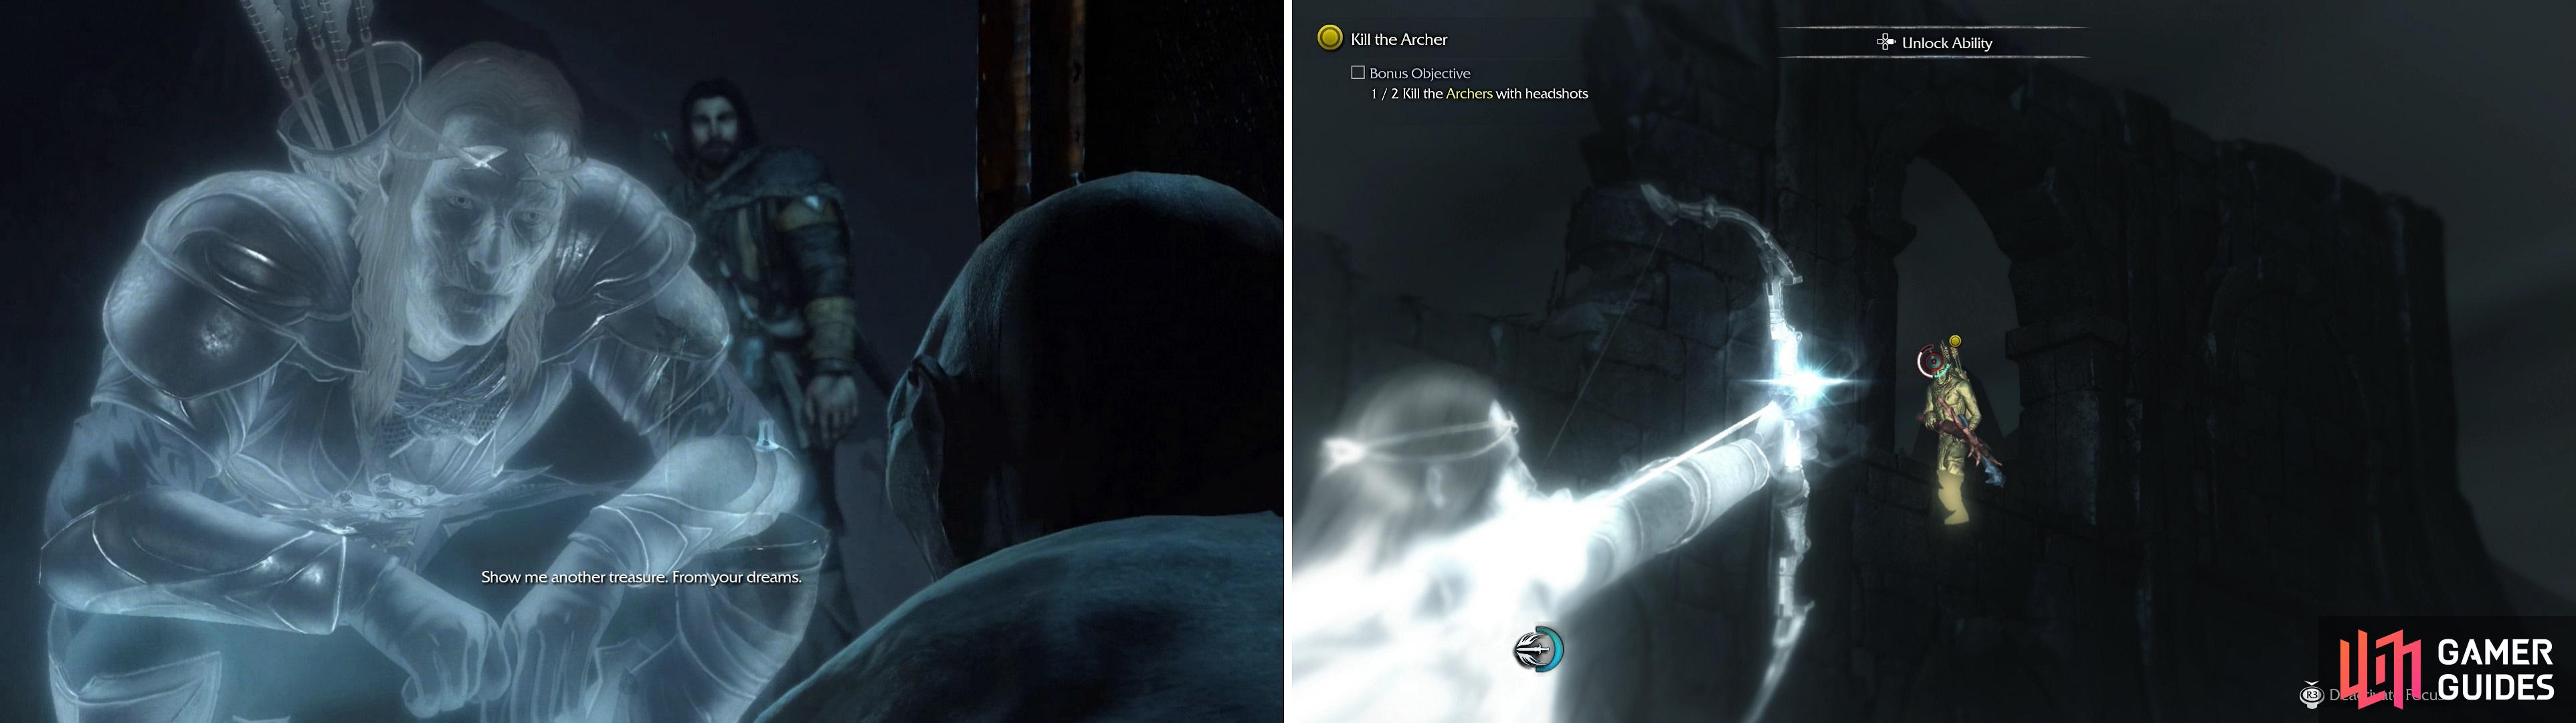 Despite Talion's rudeness, the Wraith manages to persuade Gollum into leading us to another relic (left). Along the way, headshot a few Uruk archers to complete a bonus objective (right).